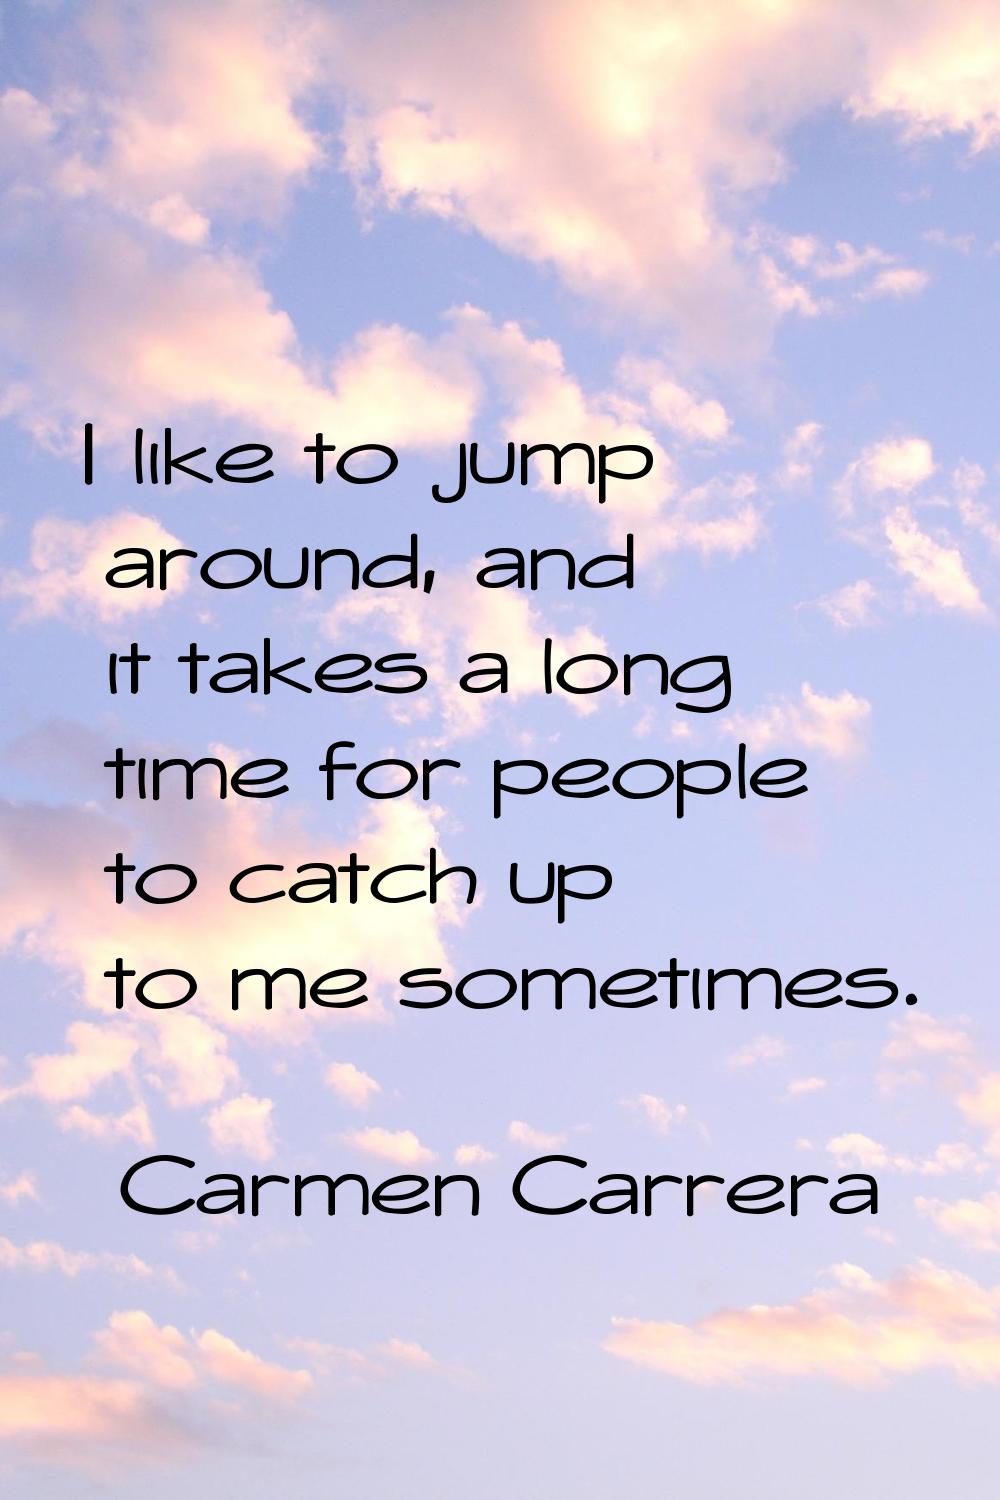 I like to jump around, and it takes a long time for people to catch up to me sometimes.